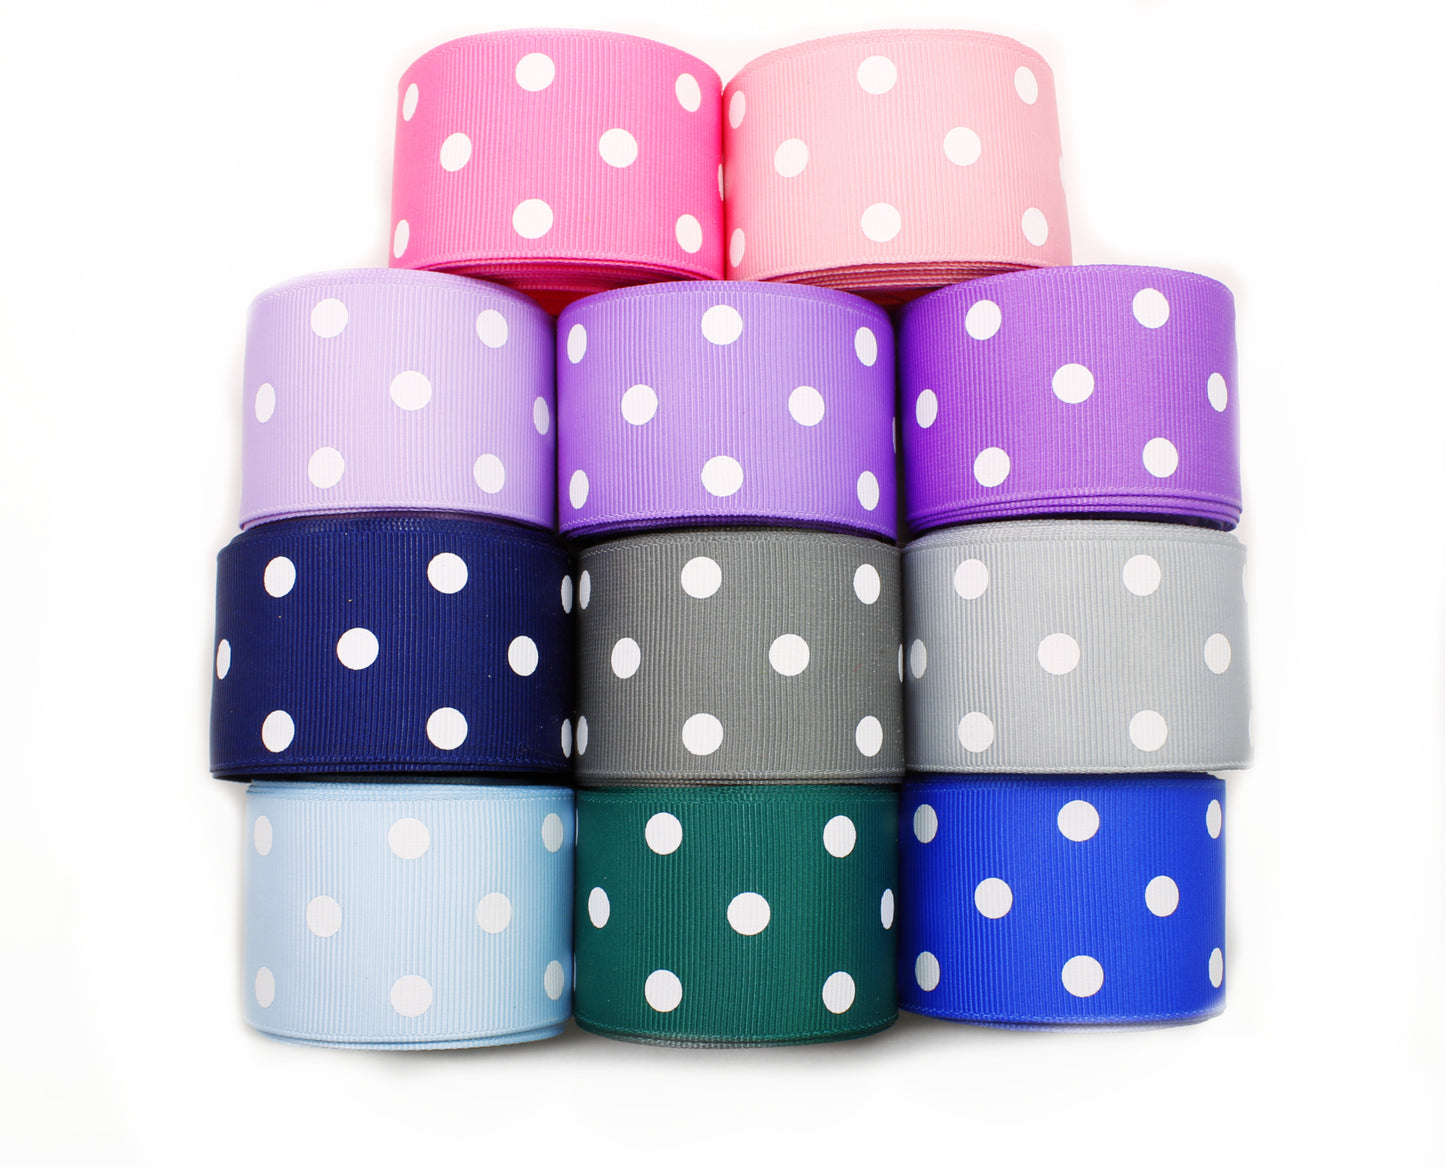 Ribbon - Swiss Dots 3/8 inch - Hairbow Supplies, Etc.